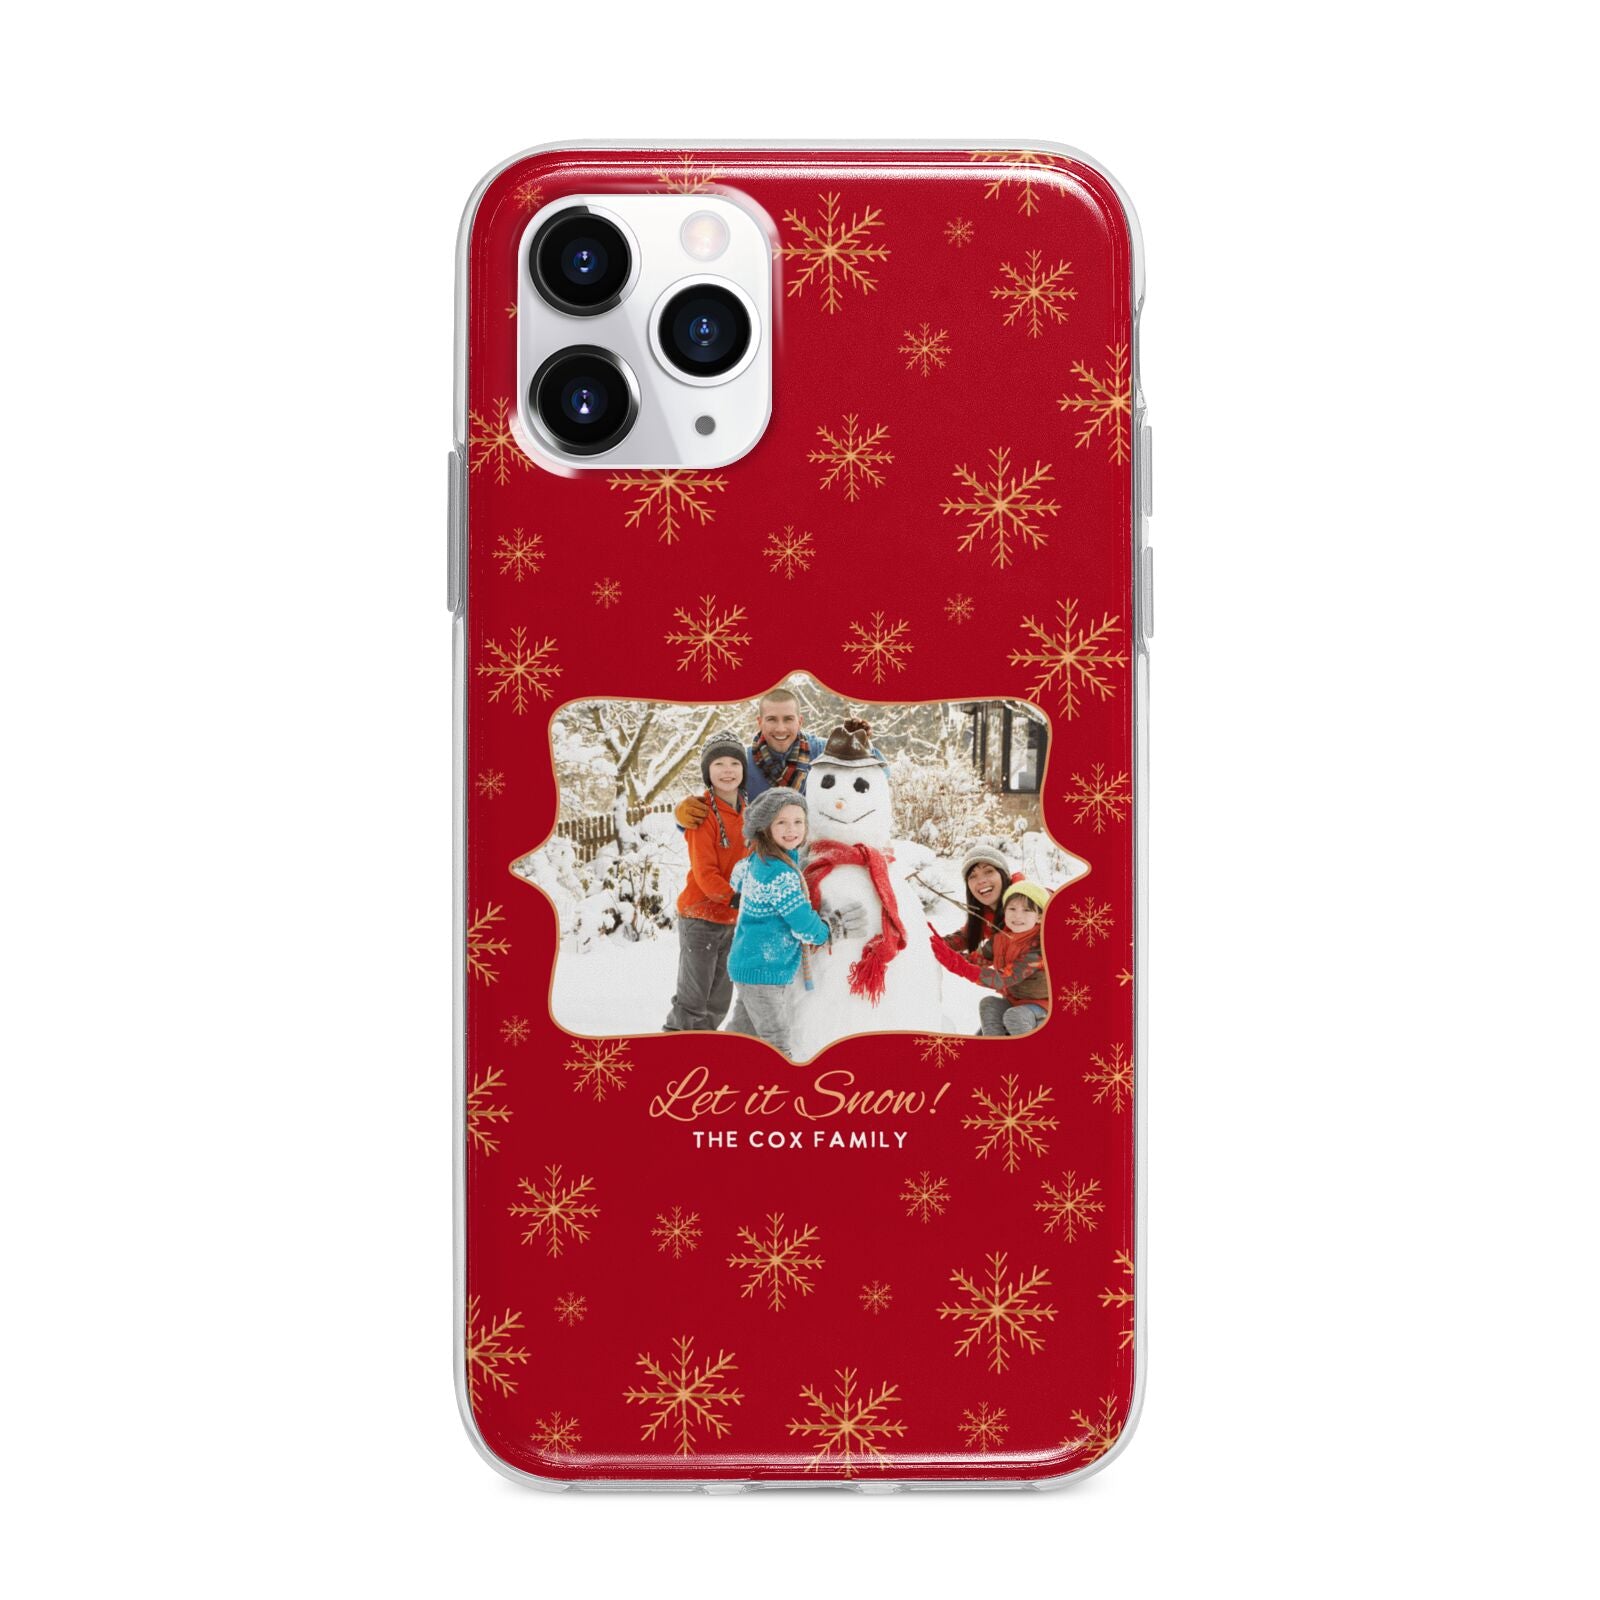 Let it Snow Christmas Photo Upload Apple iPhone 11 Pro Max in Silver with Bumper Case